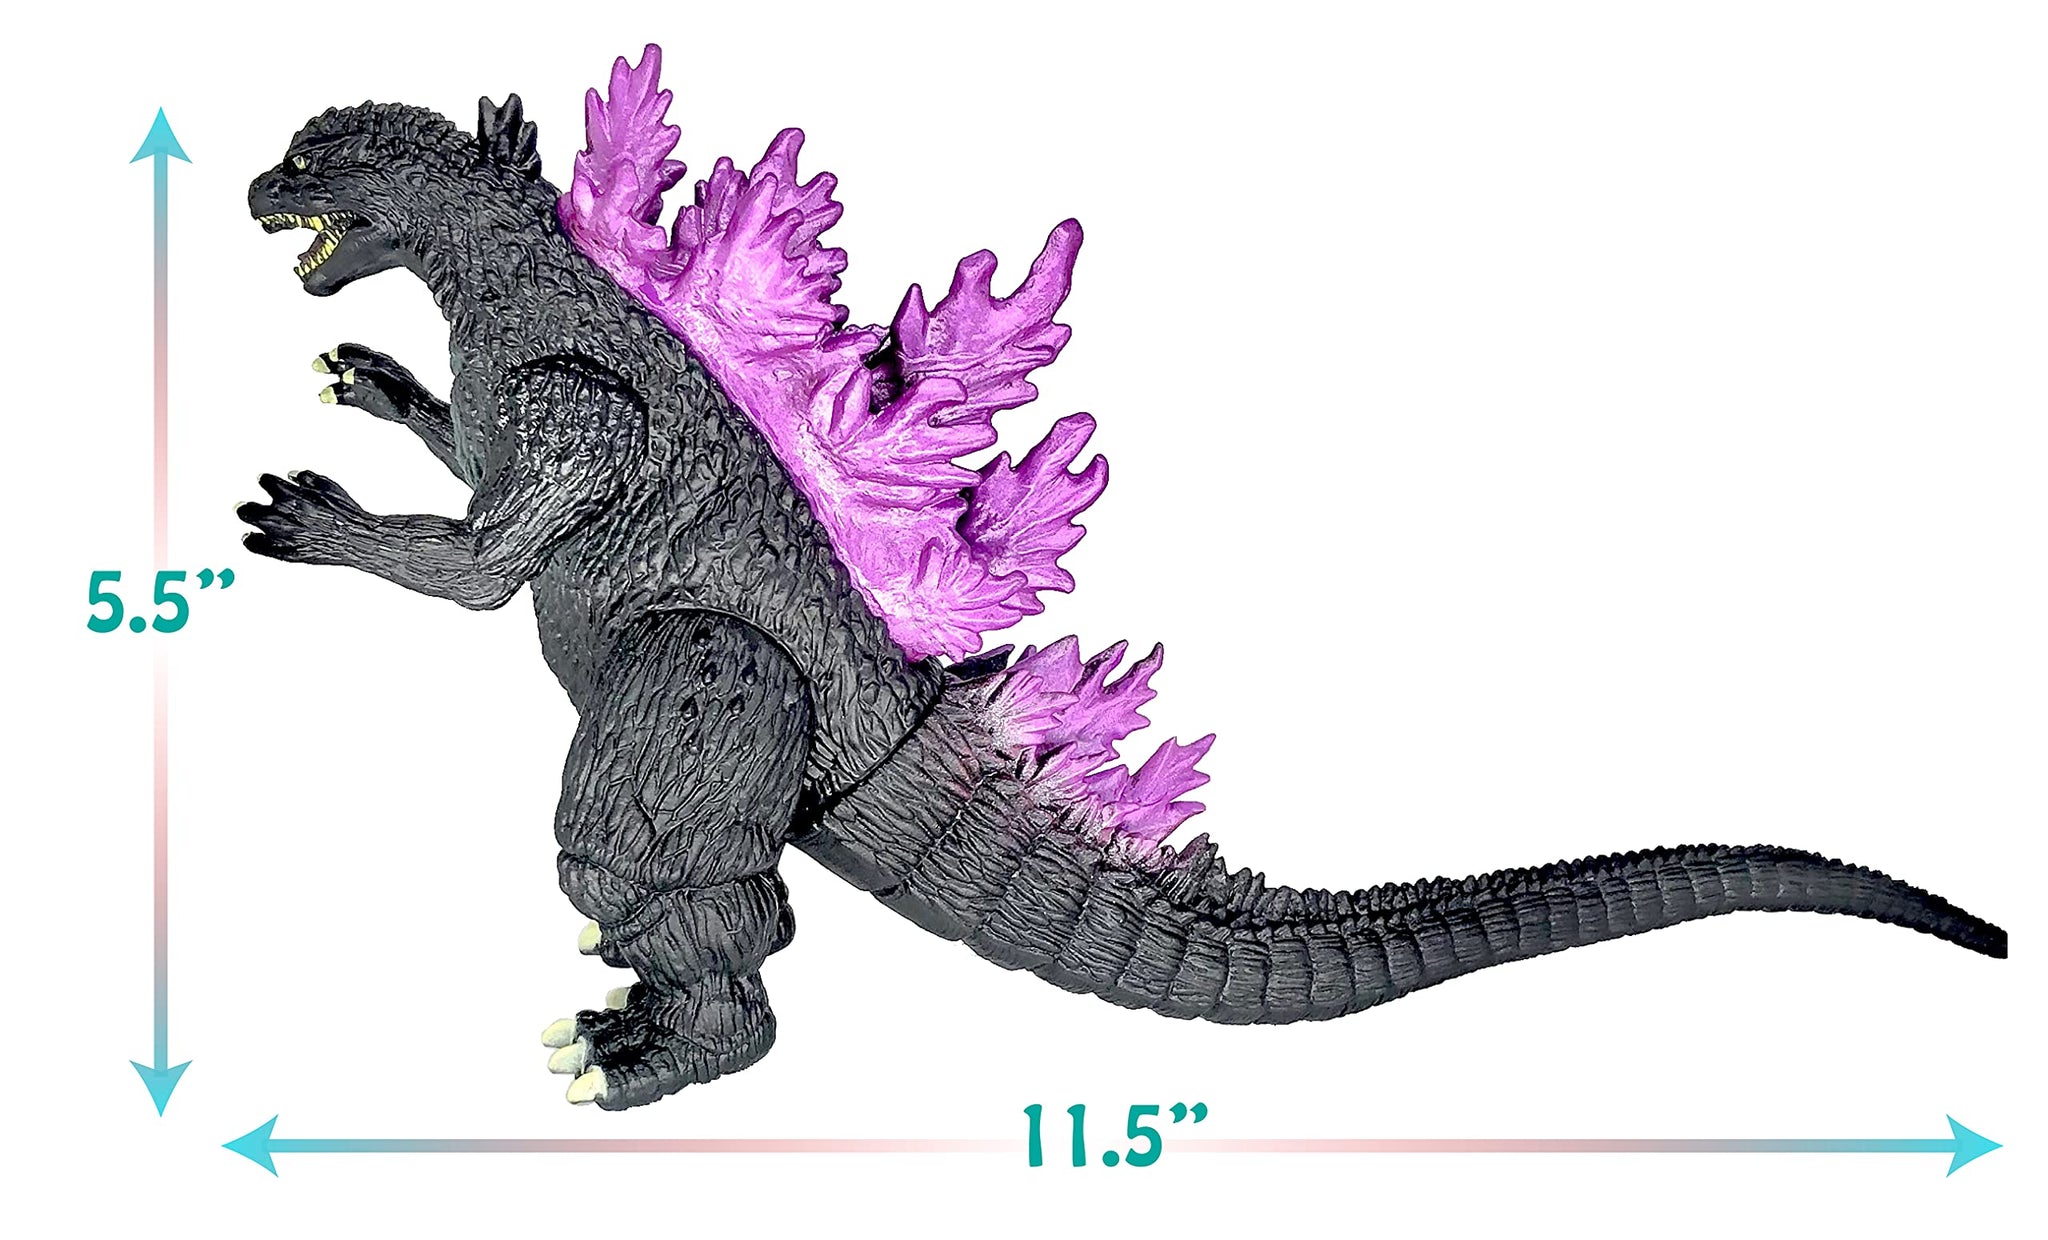 Godzilla Toy Action Figure: King of The Monsters